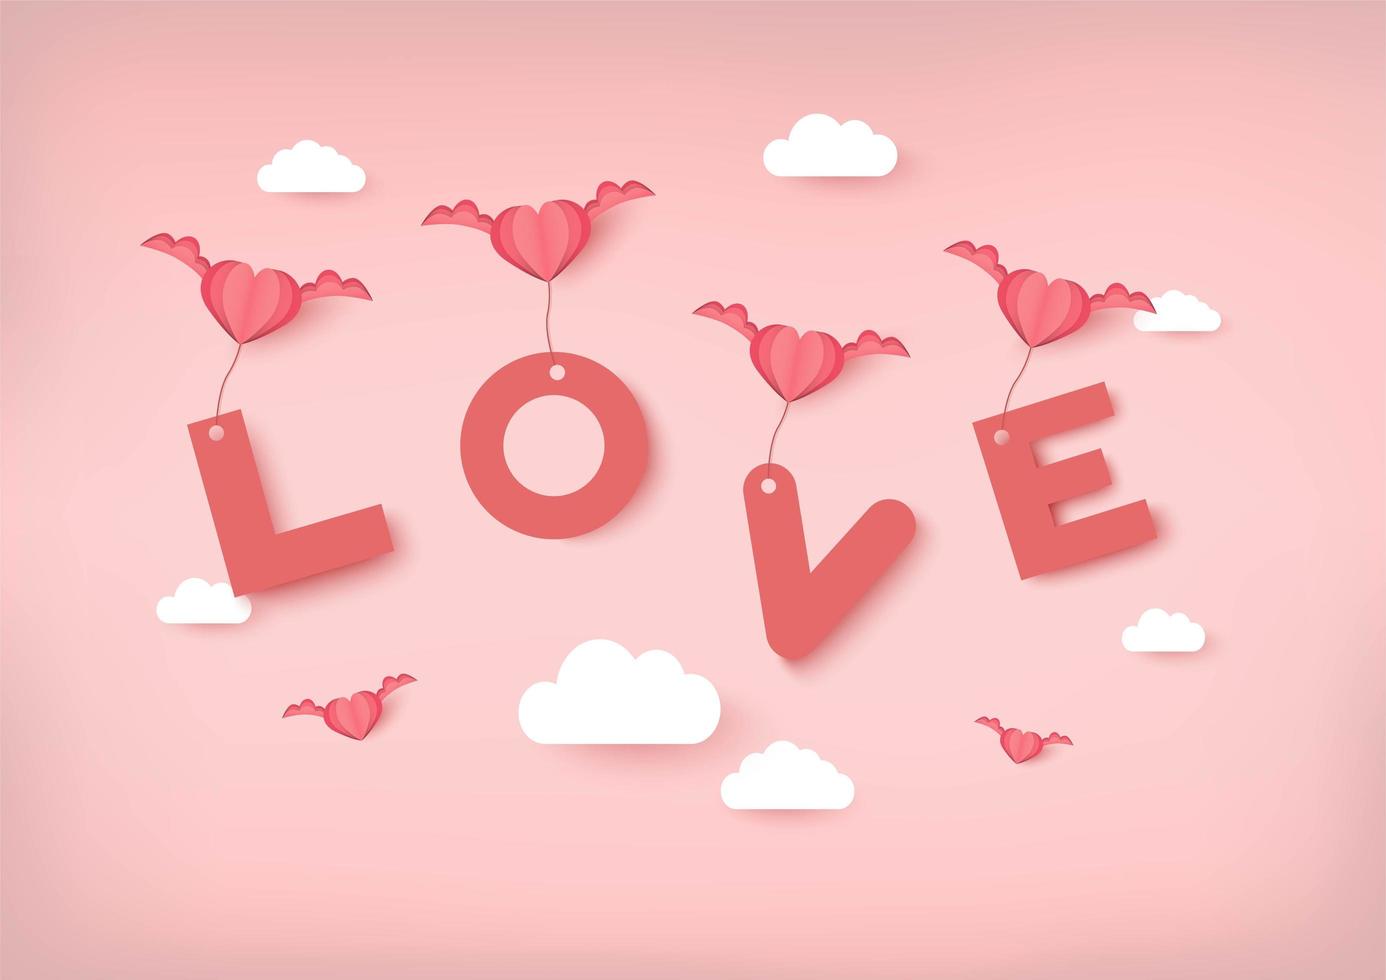 Valentines day vector background with pink hearts carrying Love text